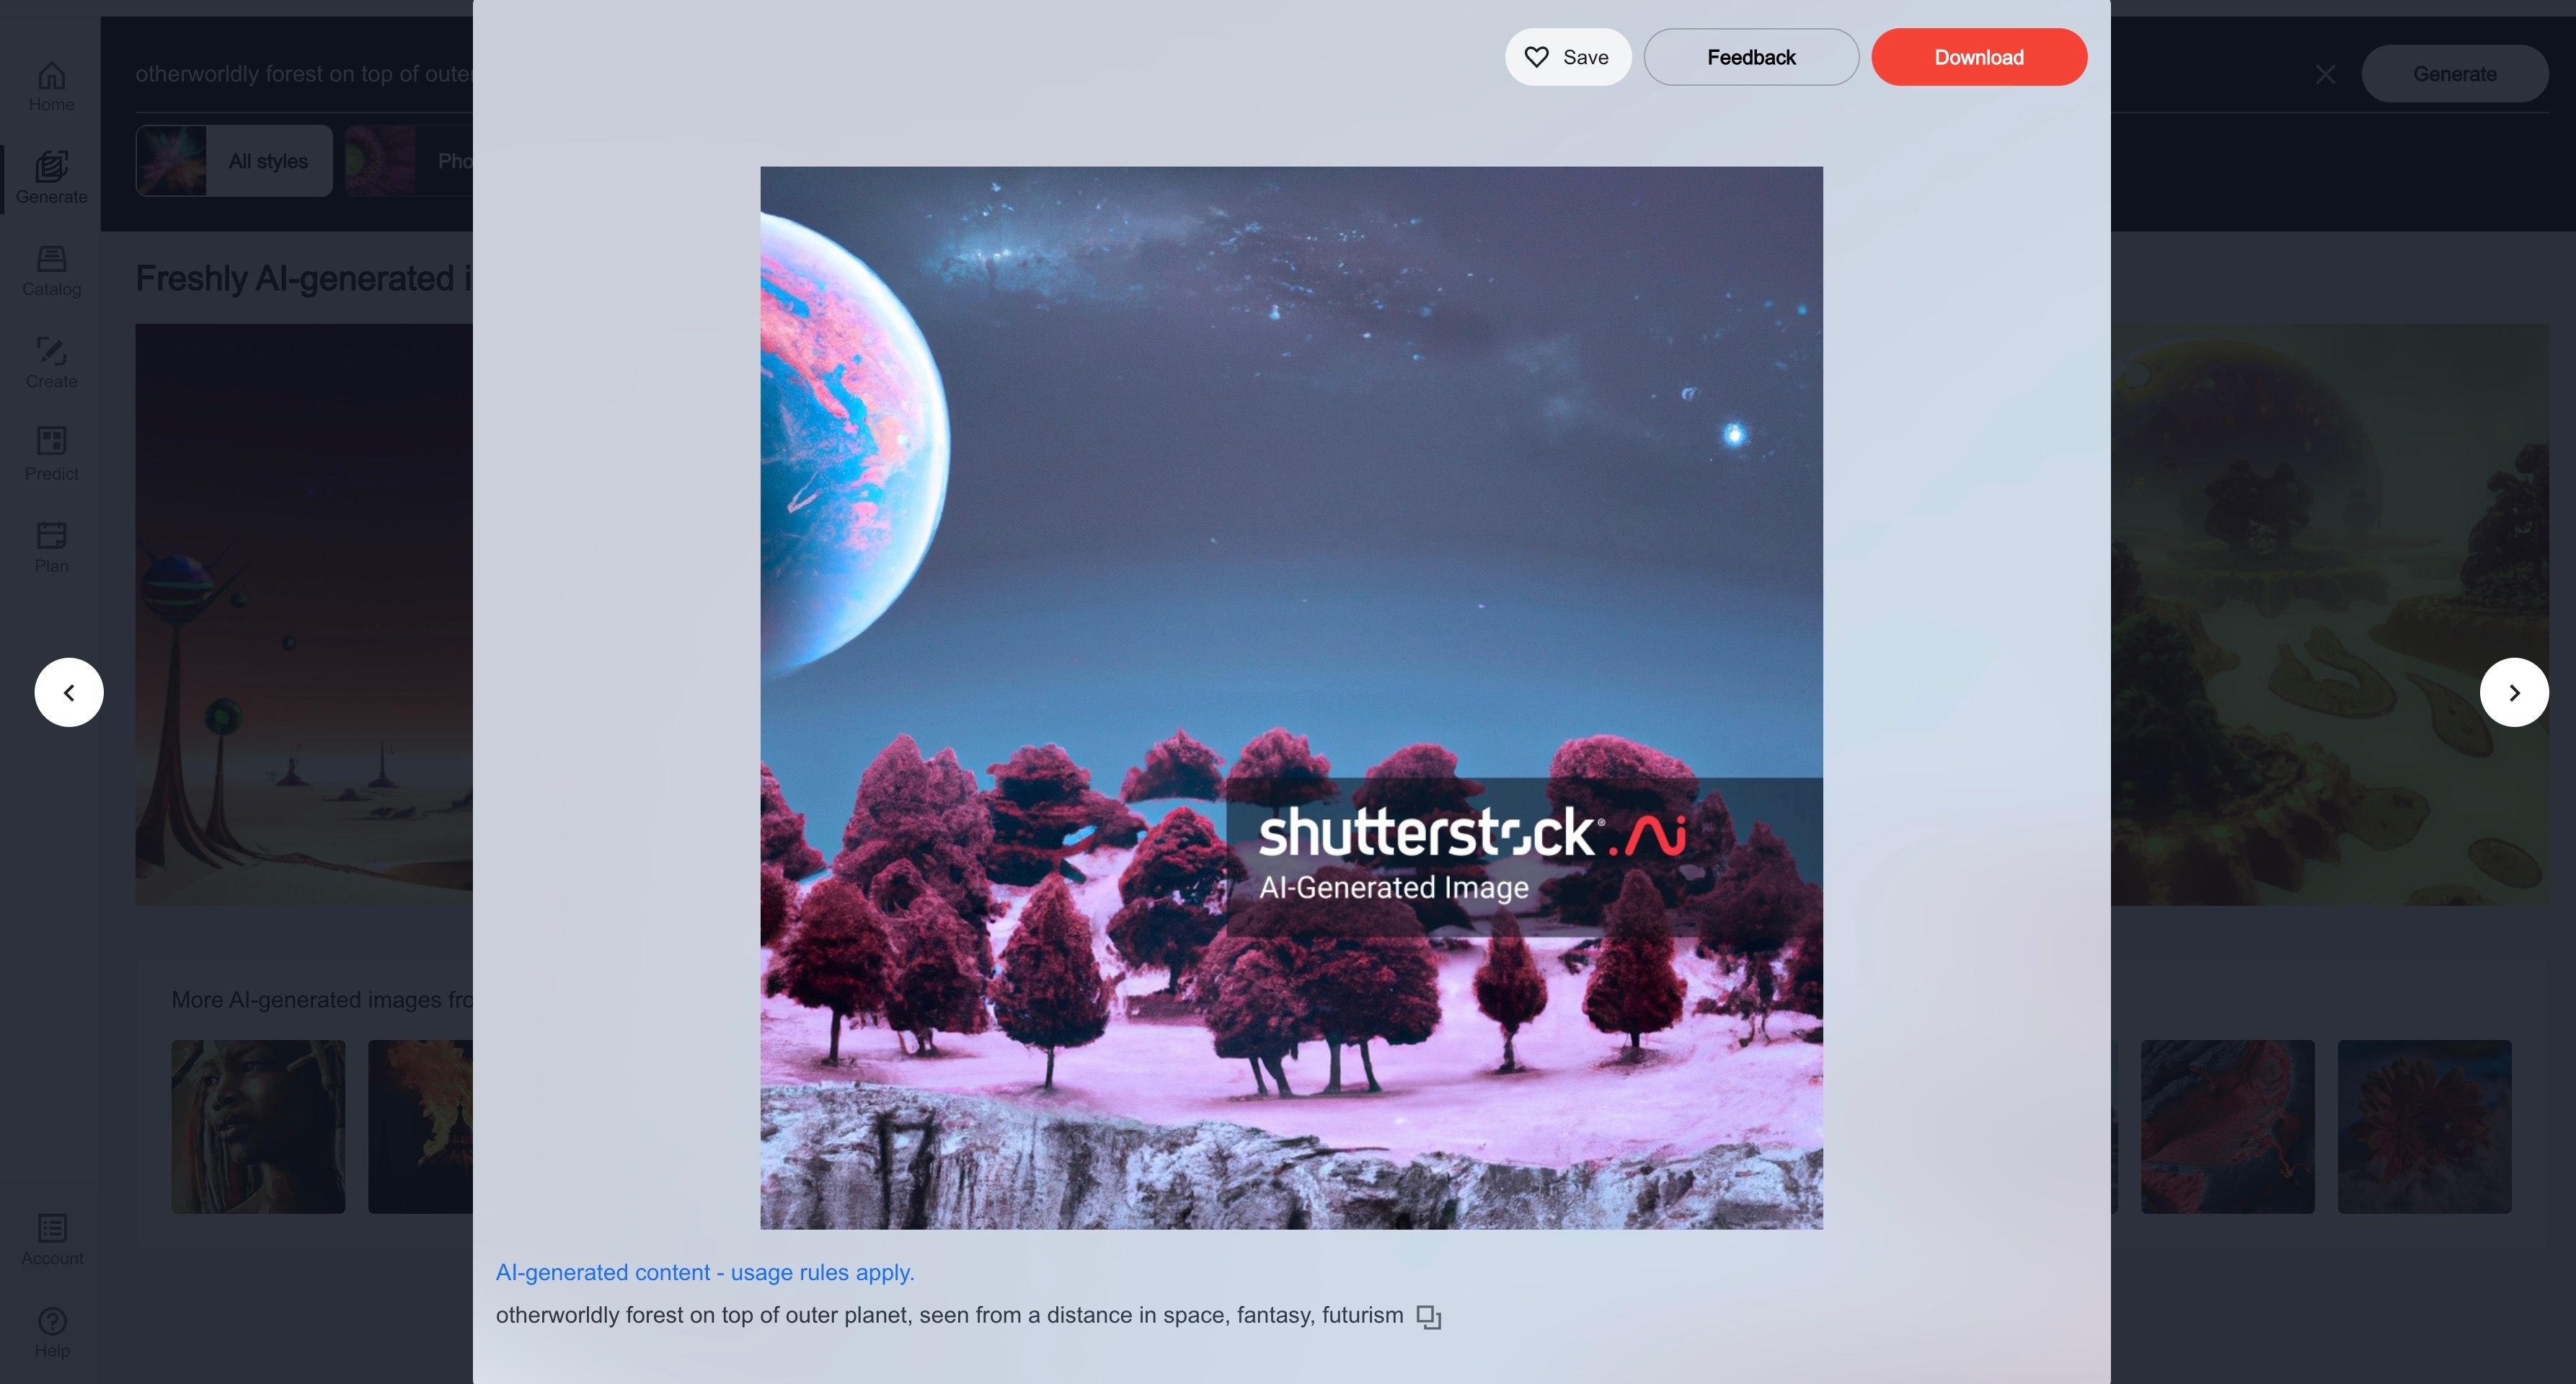 Trees atop a rock formation in space with the 'Shutterstock AI Generated Image' watermark